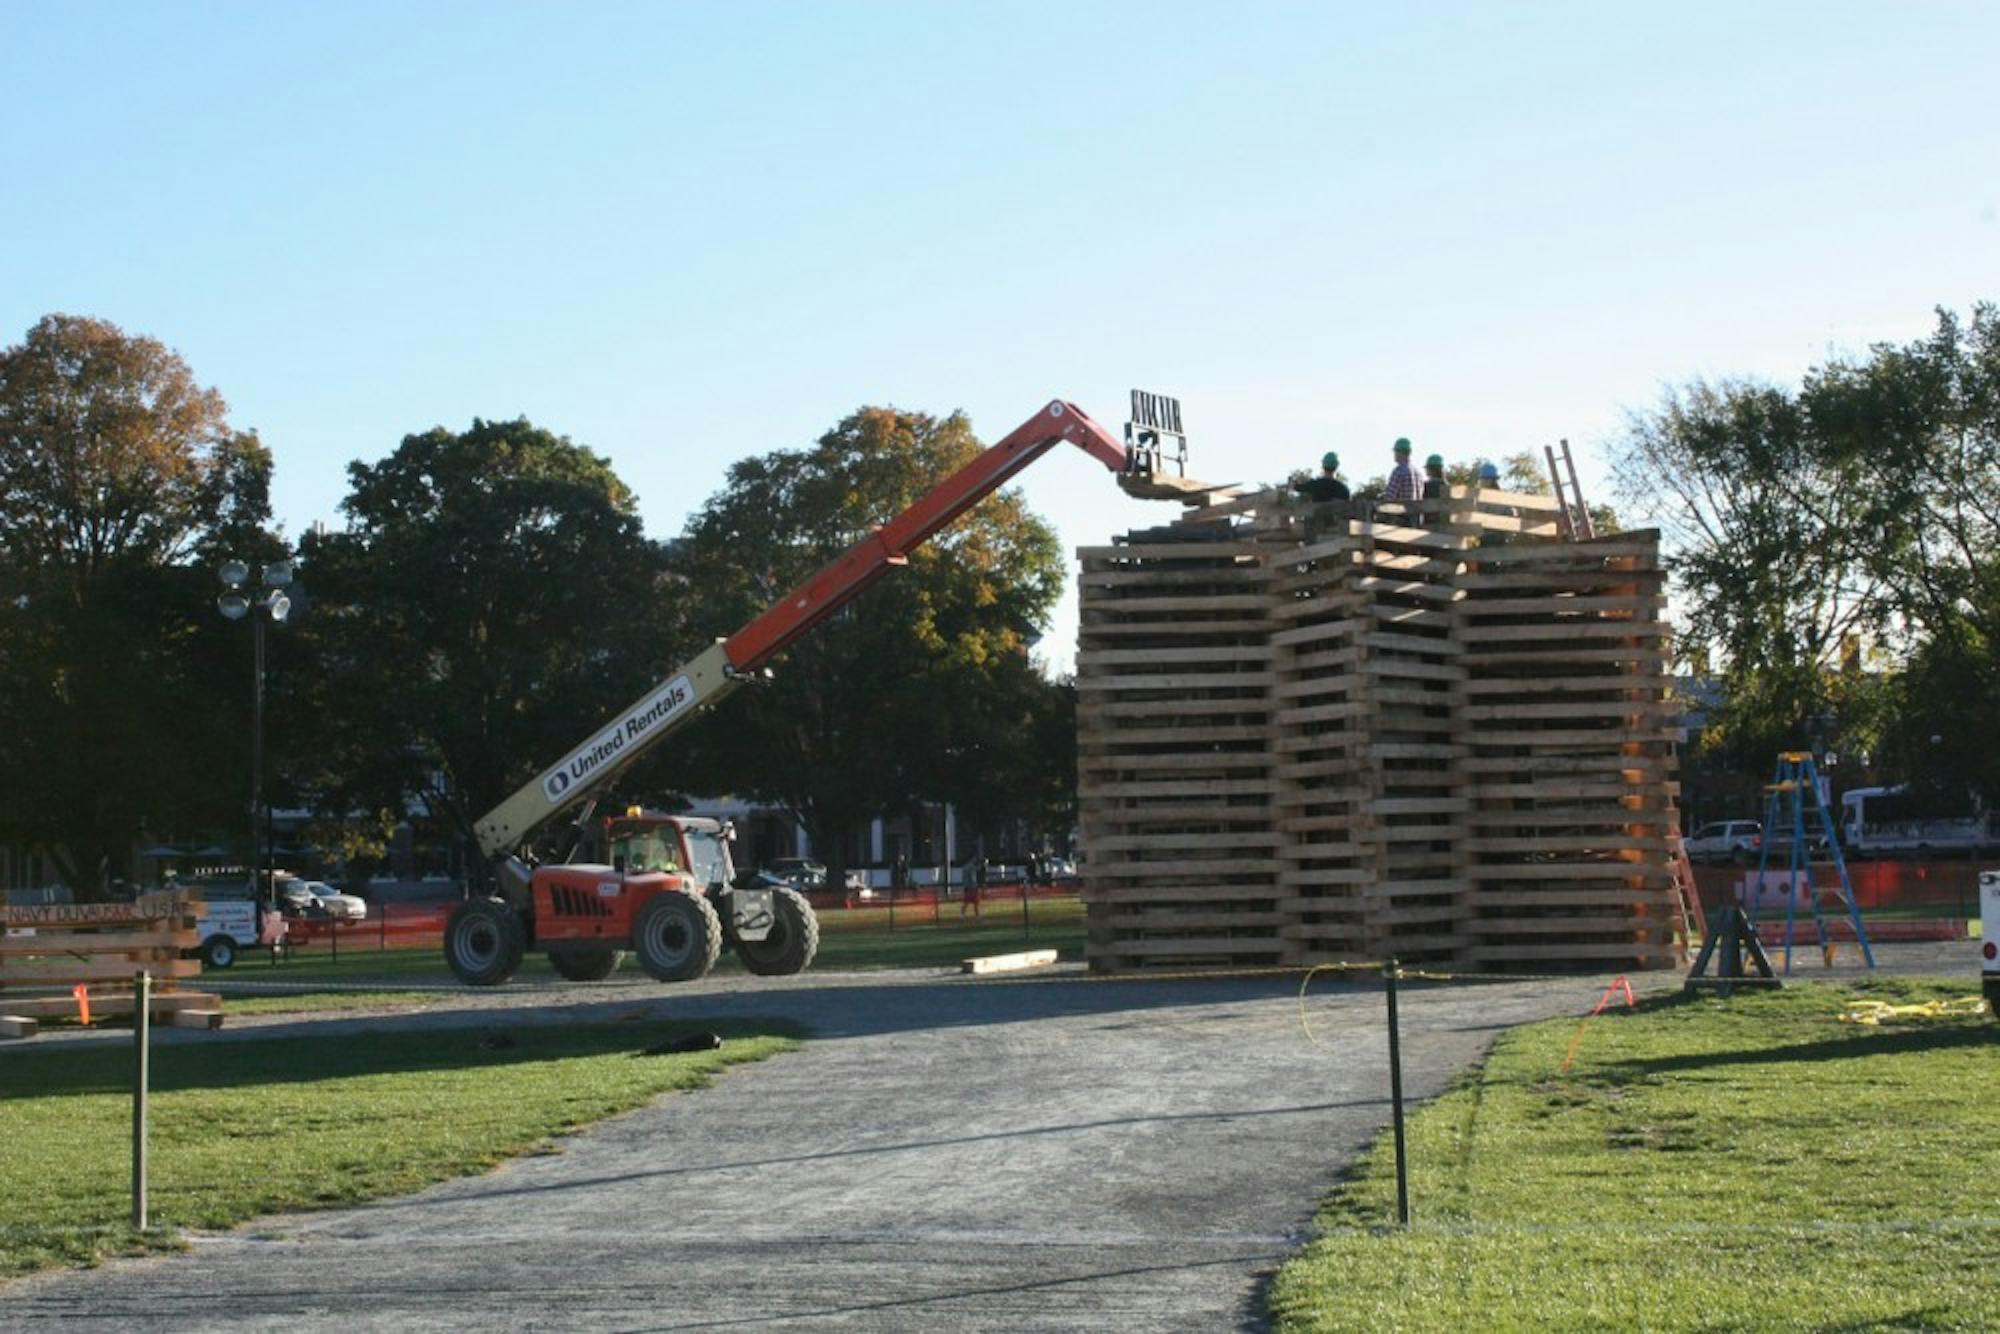 As of Thursday, the Homecoming bonfire was still in the process of being built.